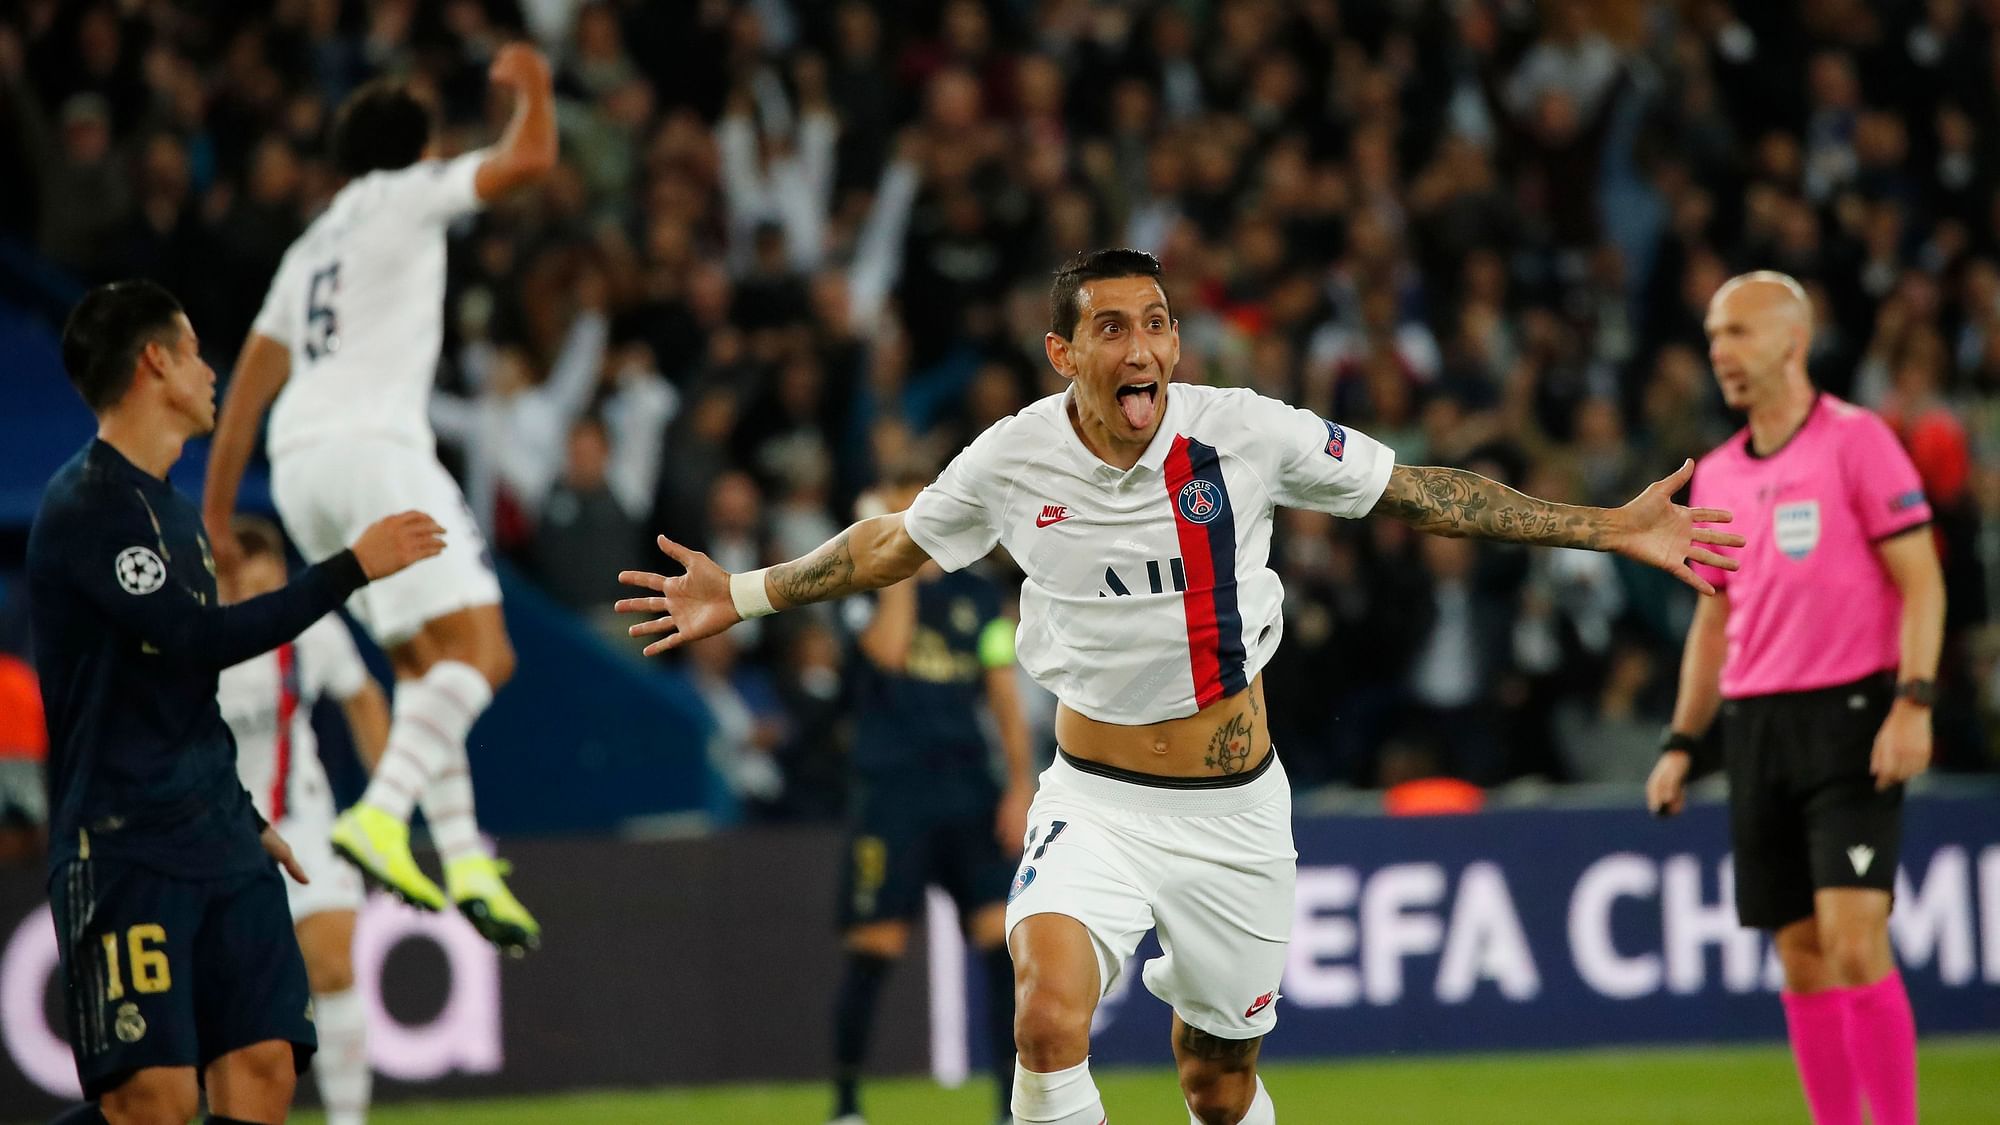 Angel Di Maria celebrates after scoring his side’s second goal